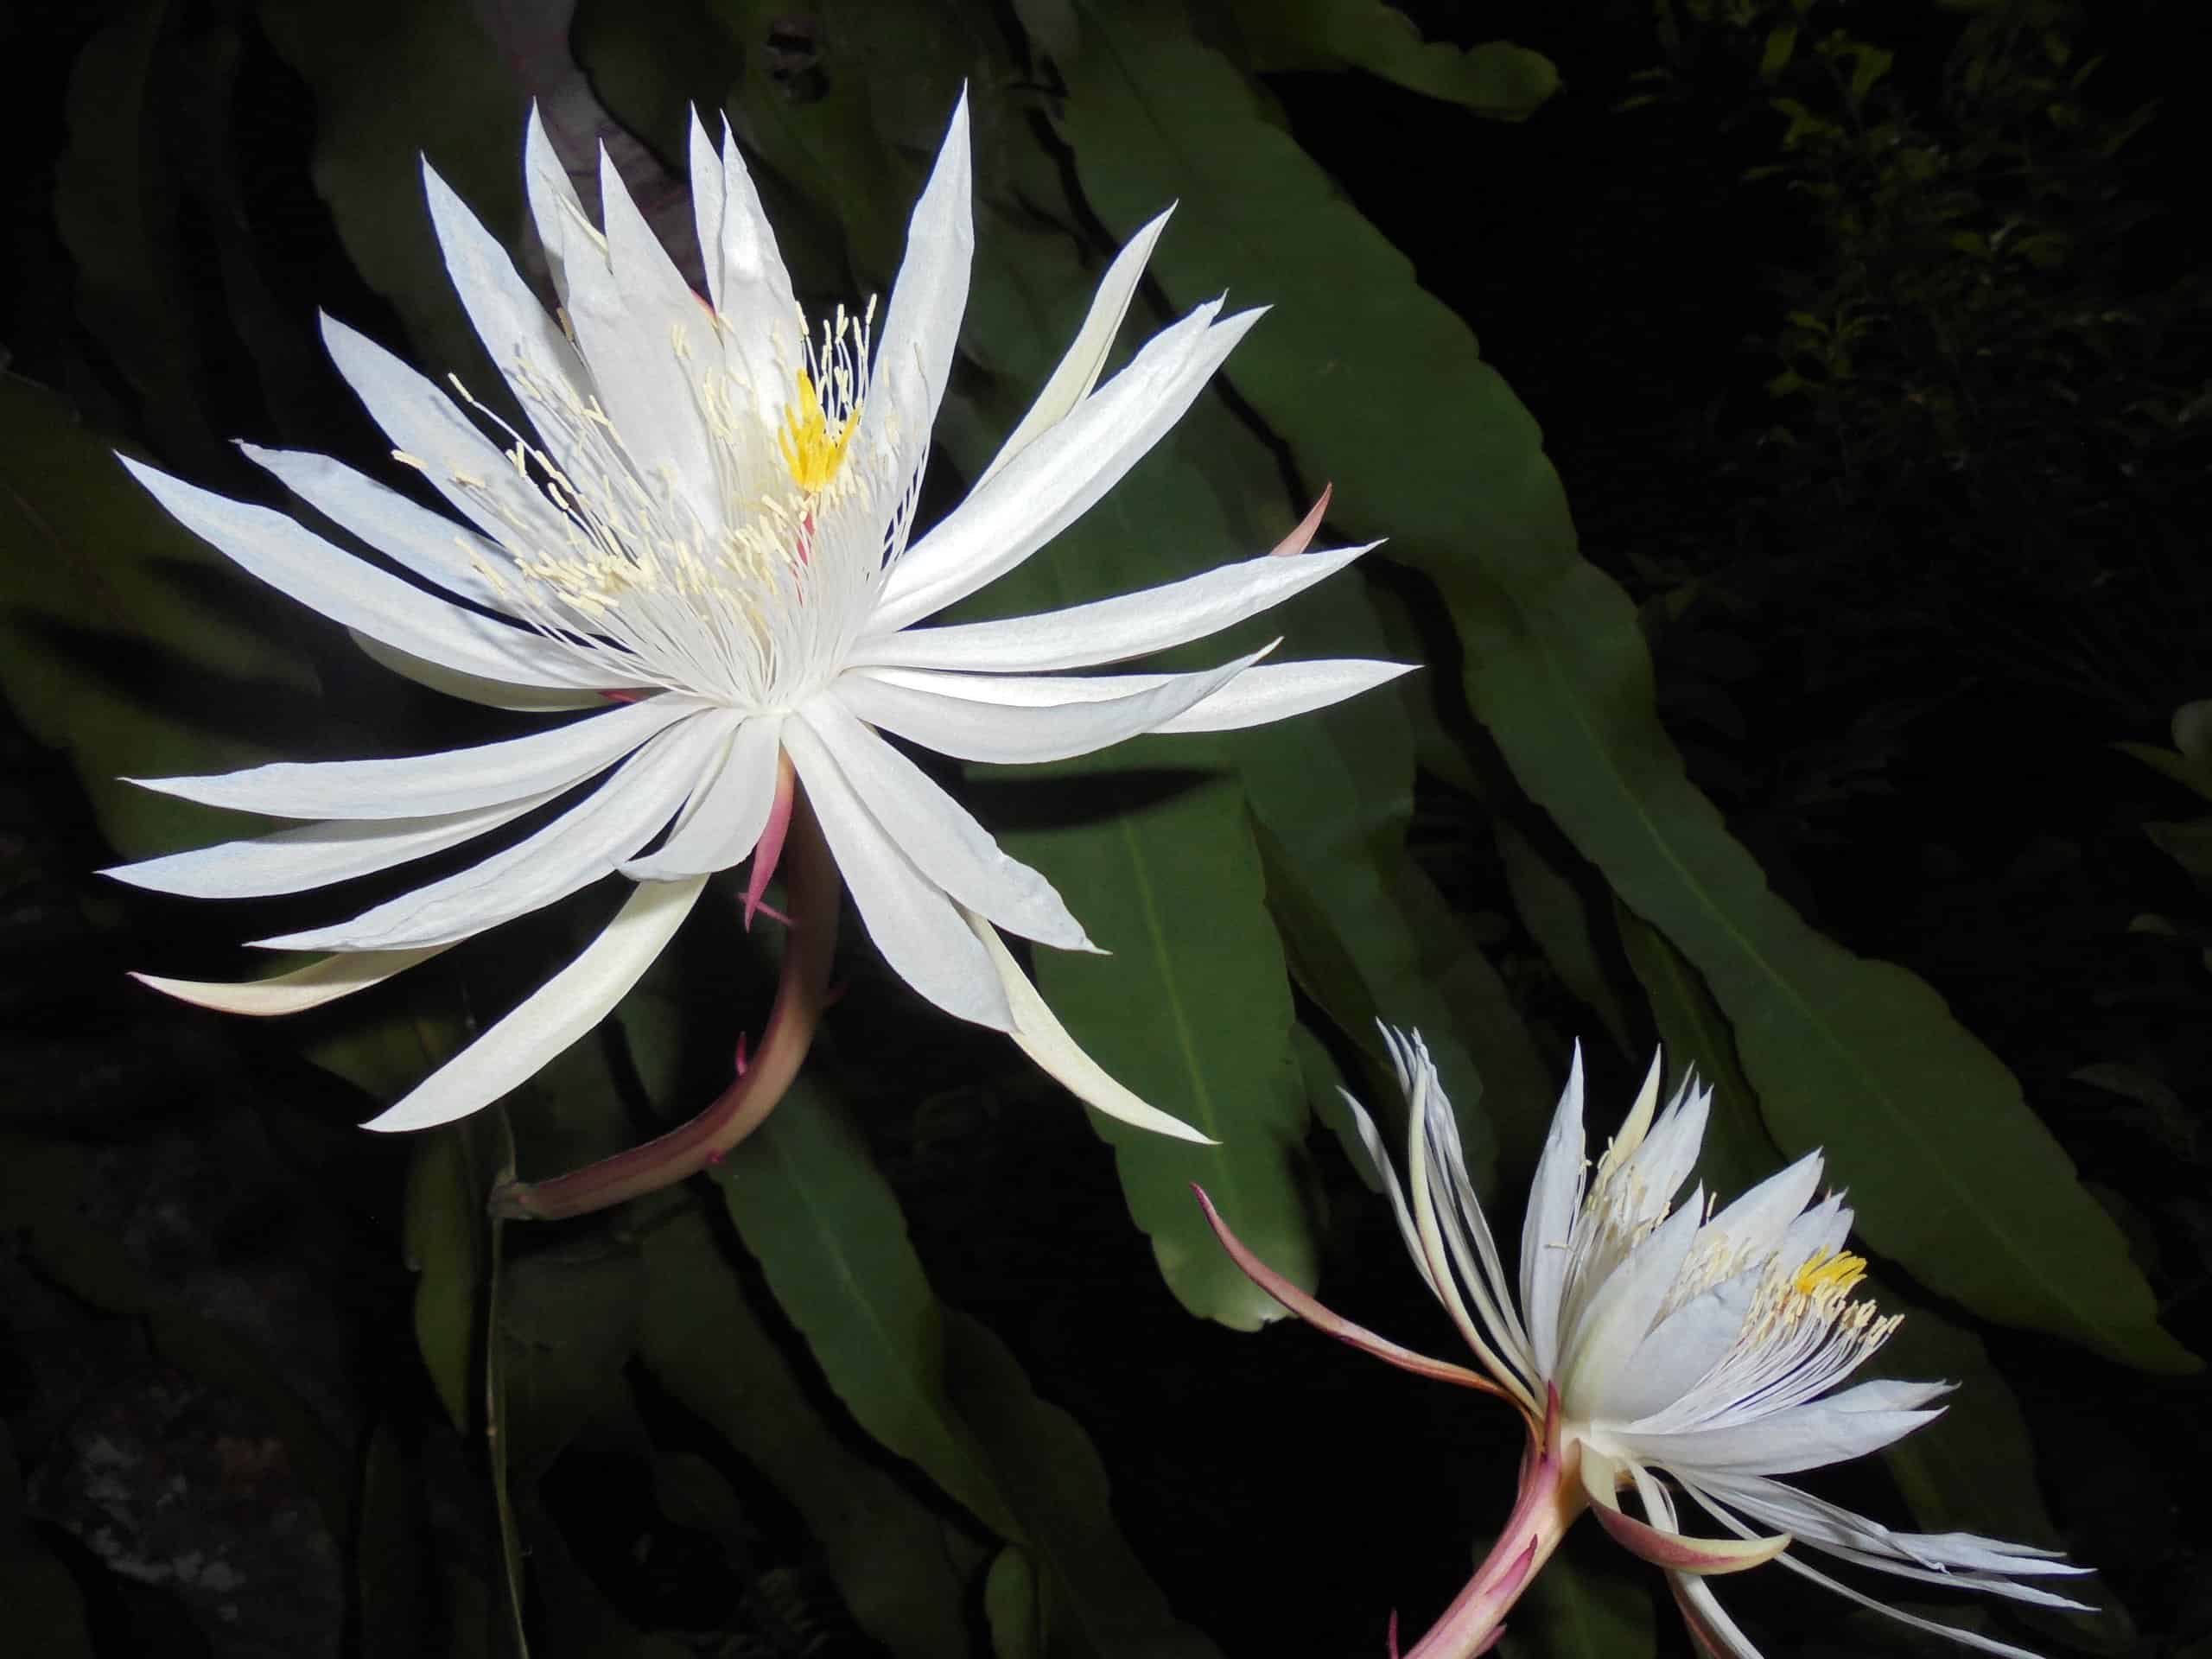 Night blooming cactus flower only blooms at night, once a year